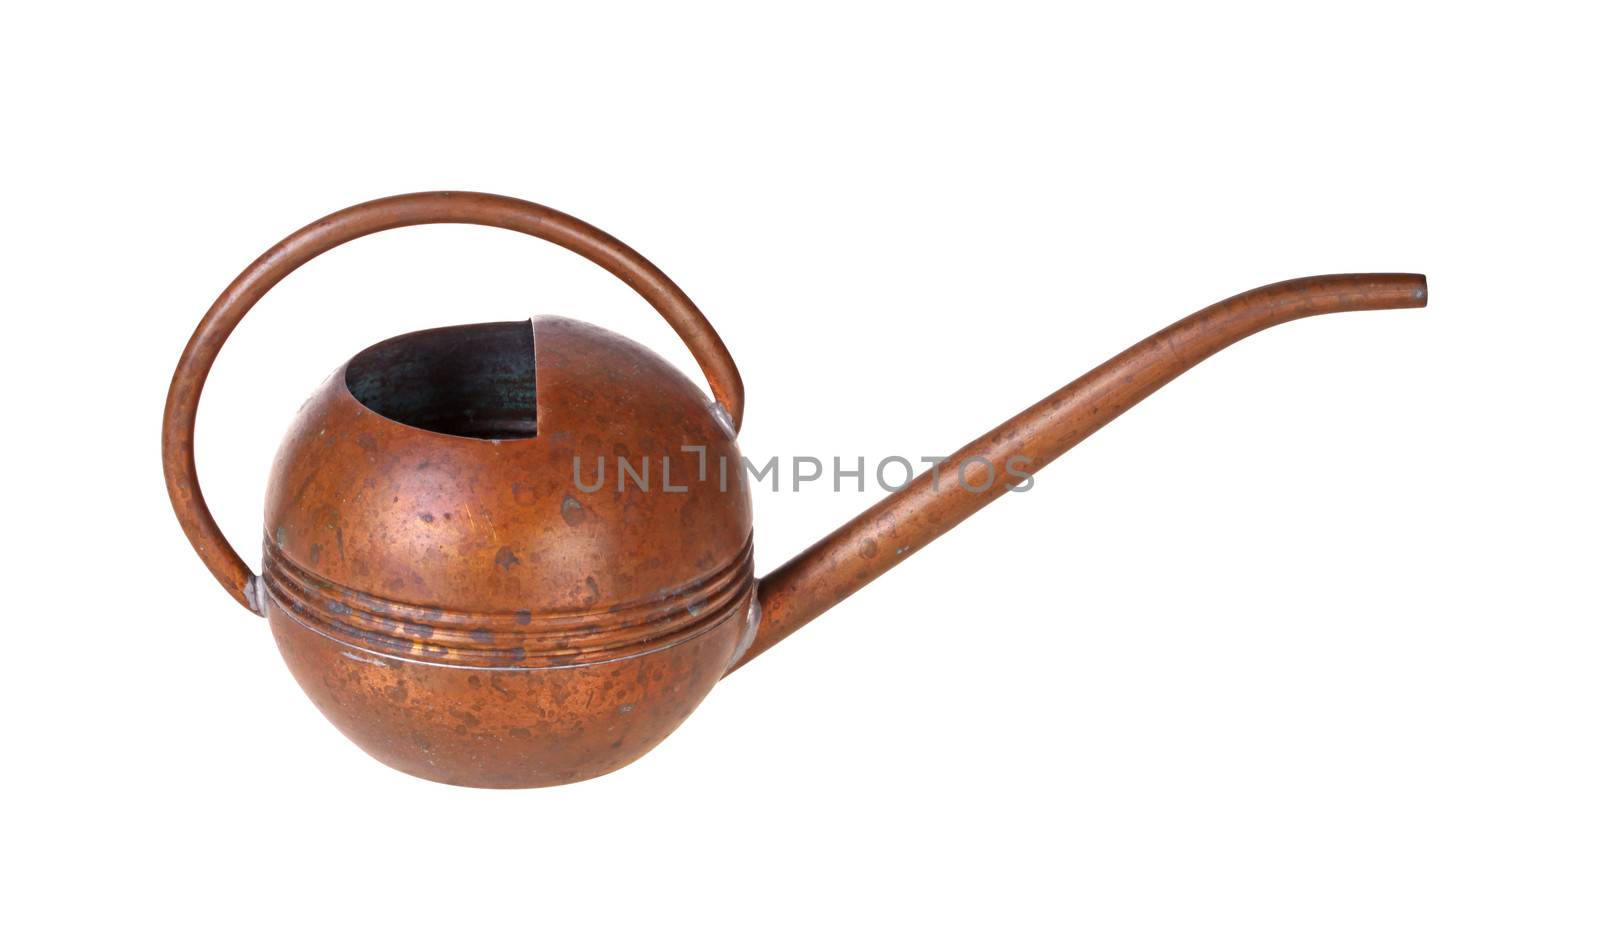 Antique copper watering can isolated against white by sgoodwin4813